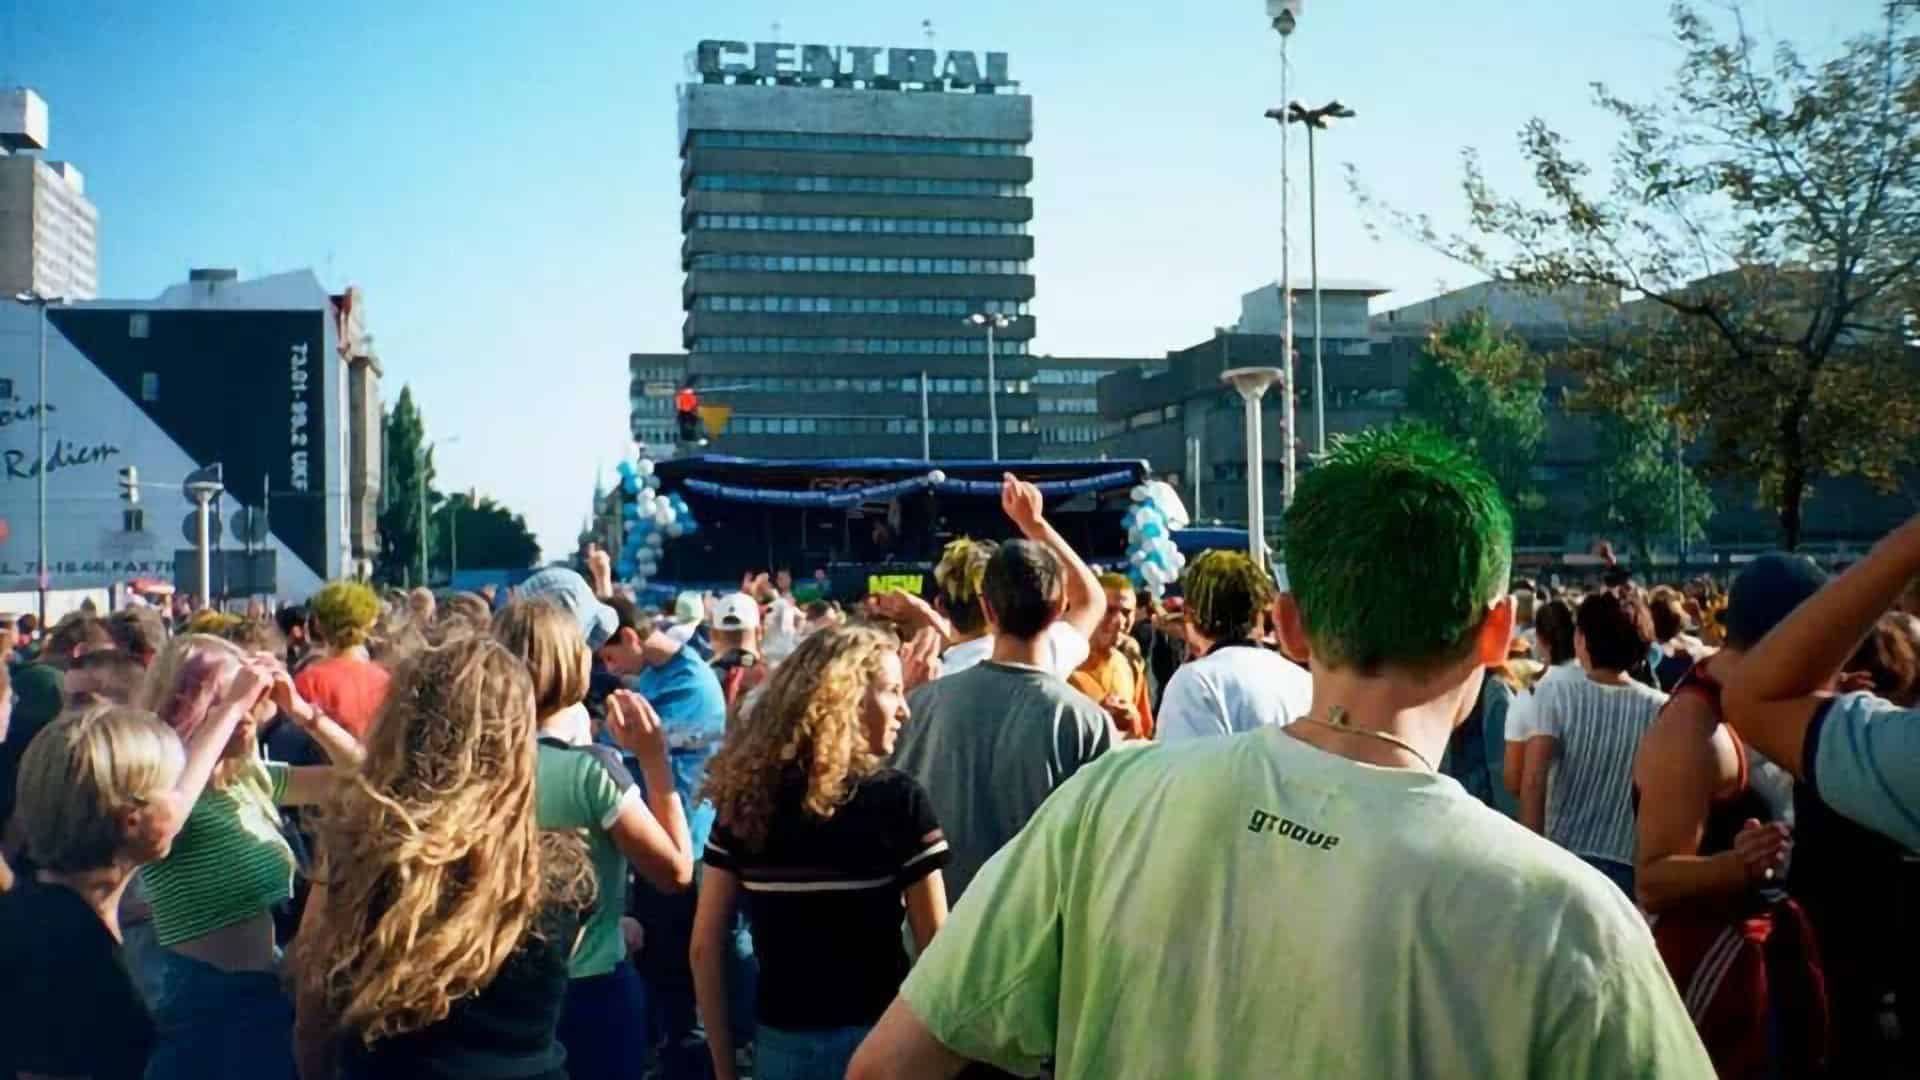 Polish techno parades are immortalised in new book 'Technowulkan – Freedom Parades In Łódź'